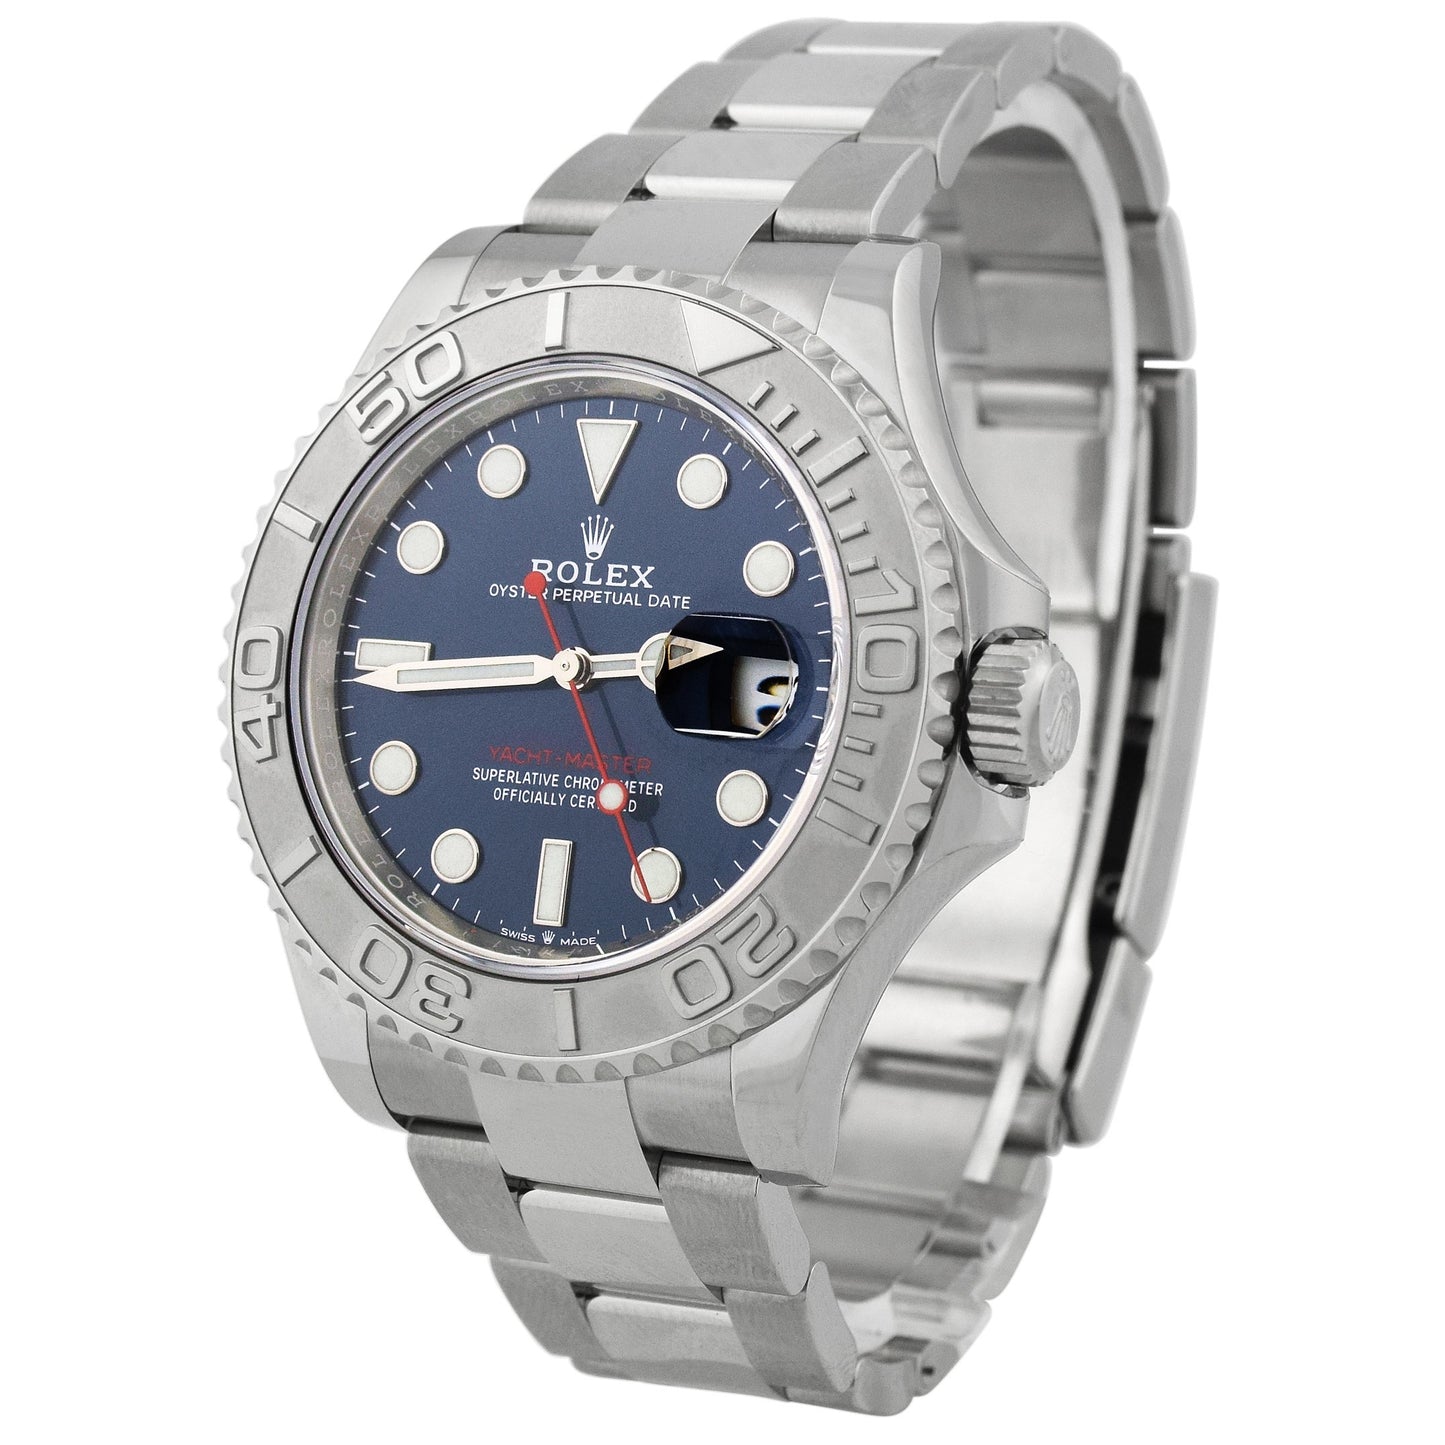 Rolex Men's Yacht-Master Stainless Steel & Platinum 40mm Blue Dot Dial Watch Reference #: 116622 - Happy Jewelers Fine Jewelry Lifetime Warranty